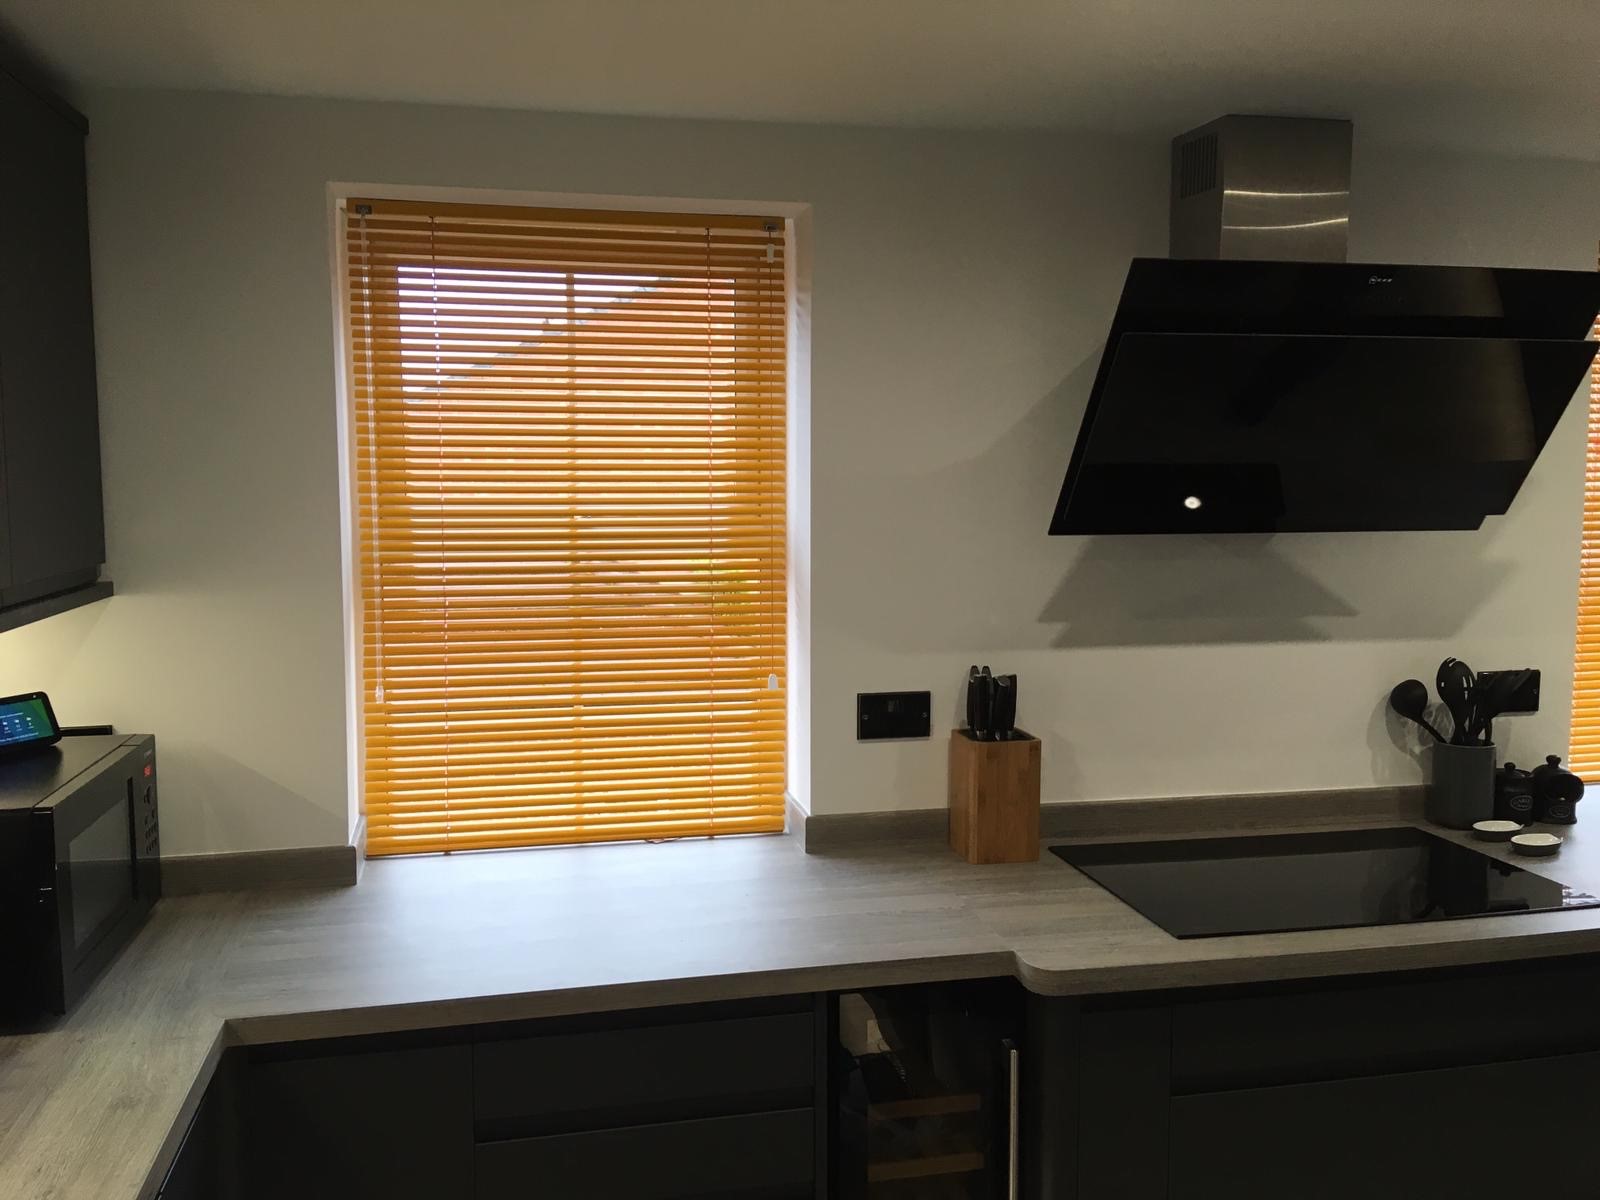 Aluminium Blinds For Kitchens Sutton-In-Ashfield